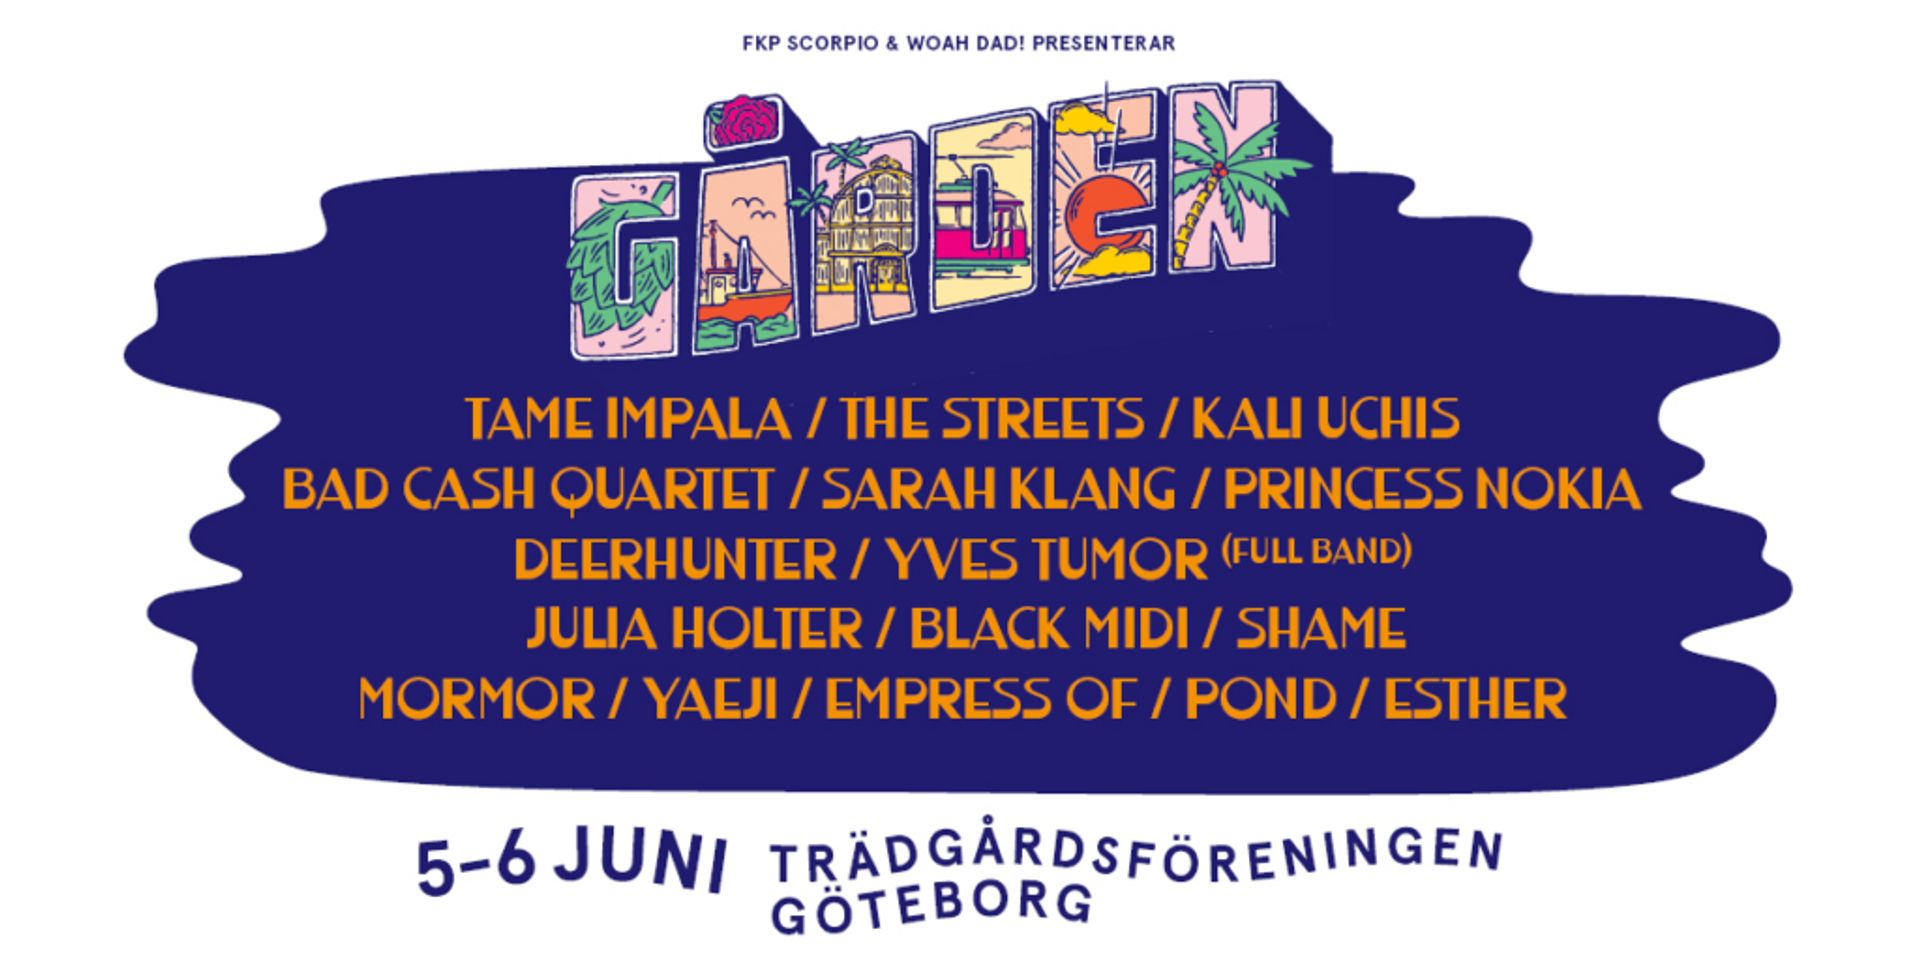 Infographic about the festival "Gården" in Gothenburg. 